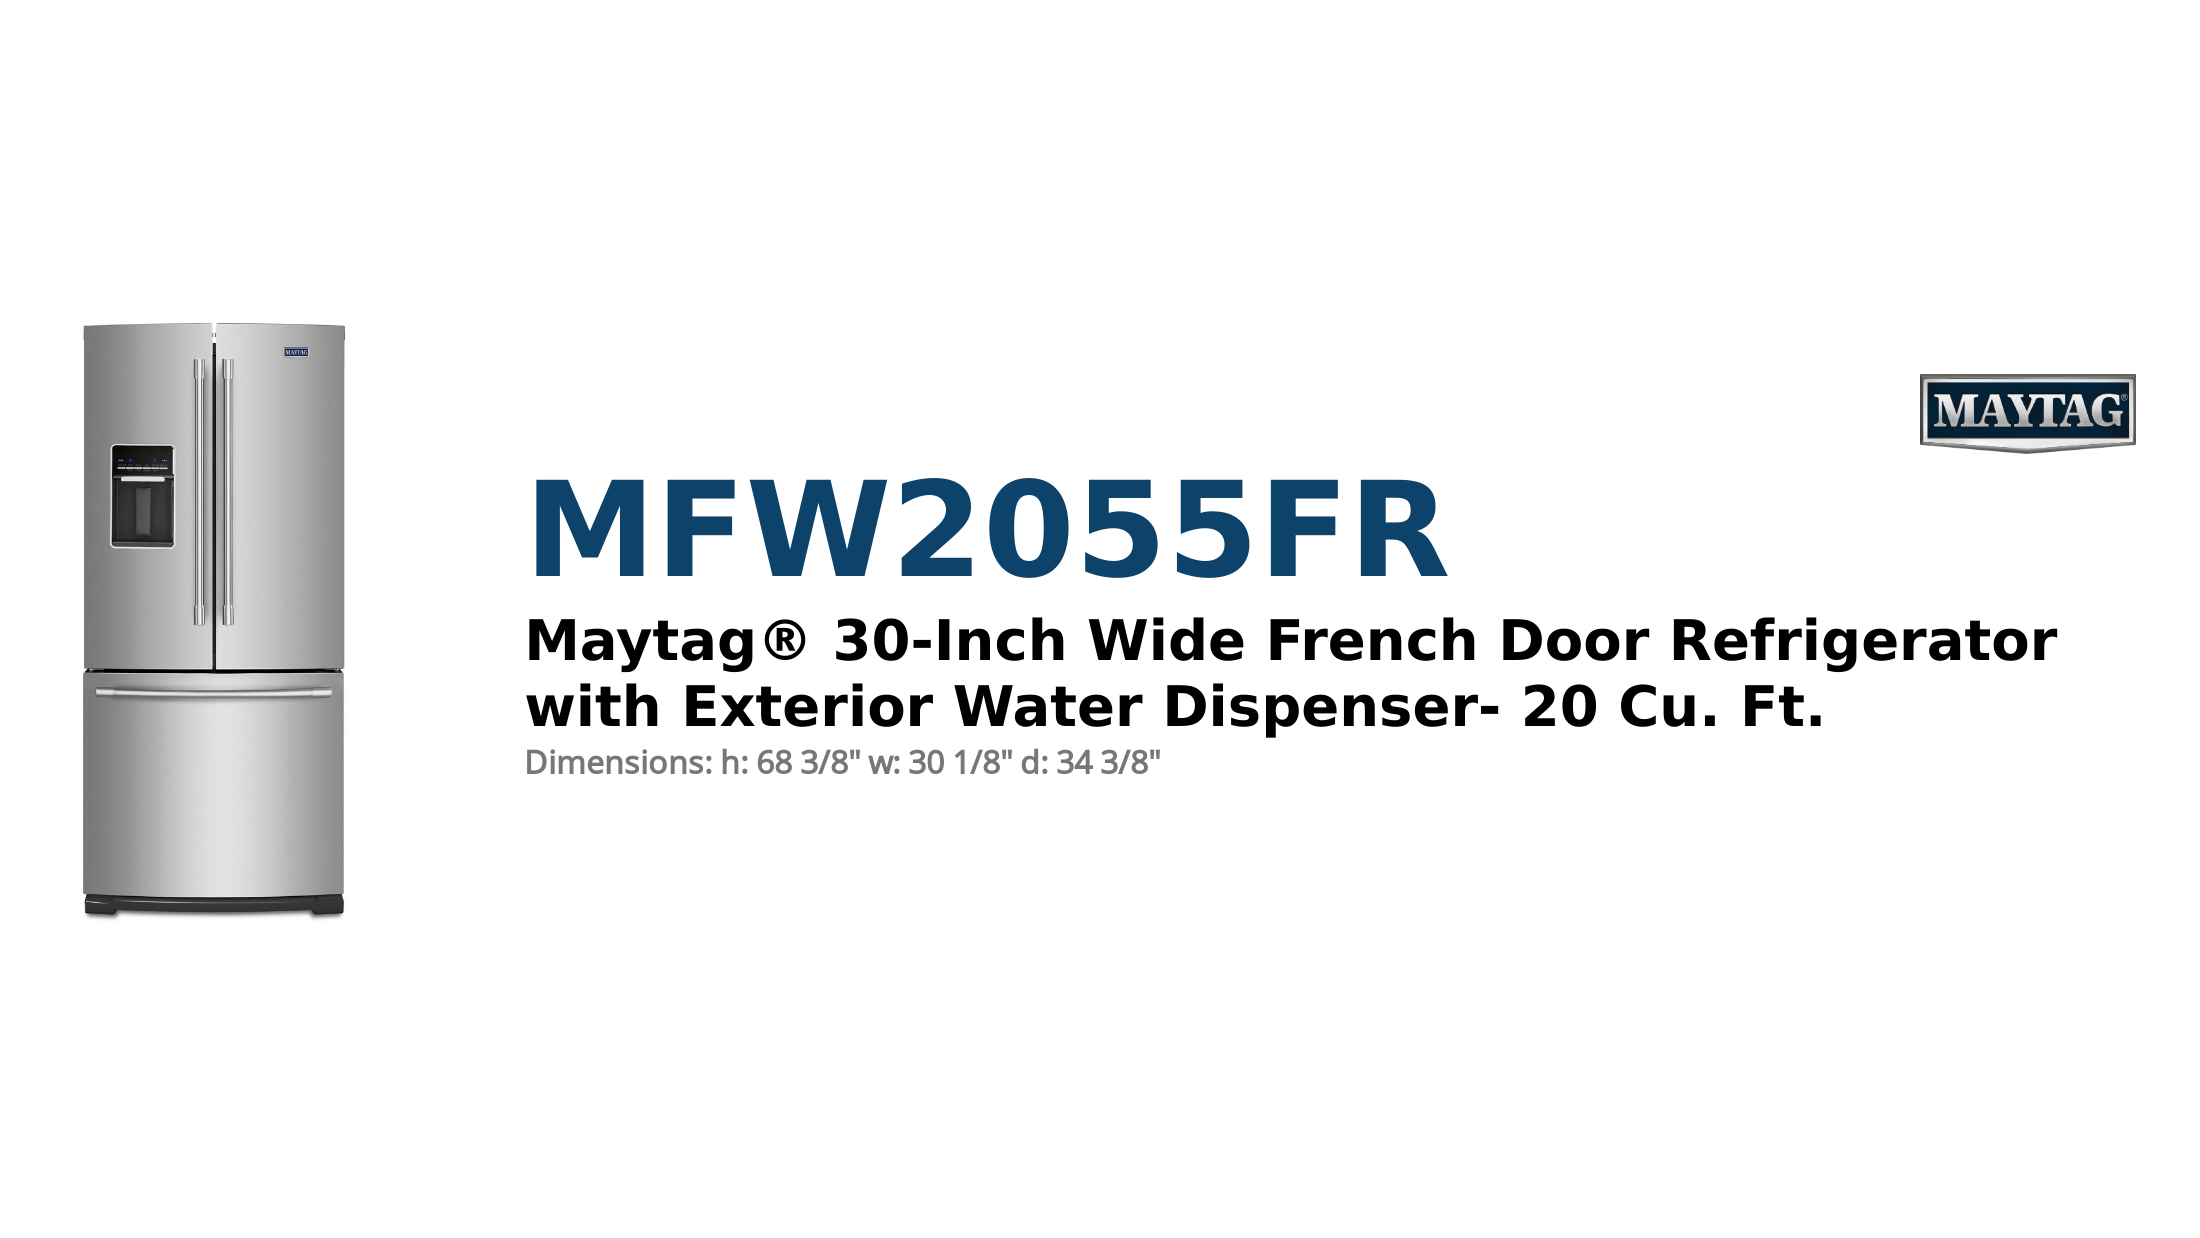 Maytag® 30-Inch Wide French Door Refrigerator with Exterior Water Dispenser- 20 Cu. Ft.